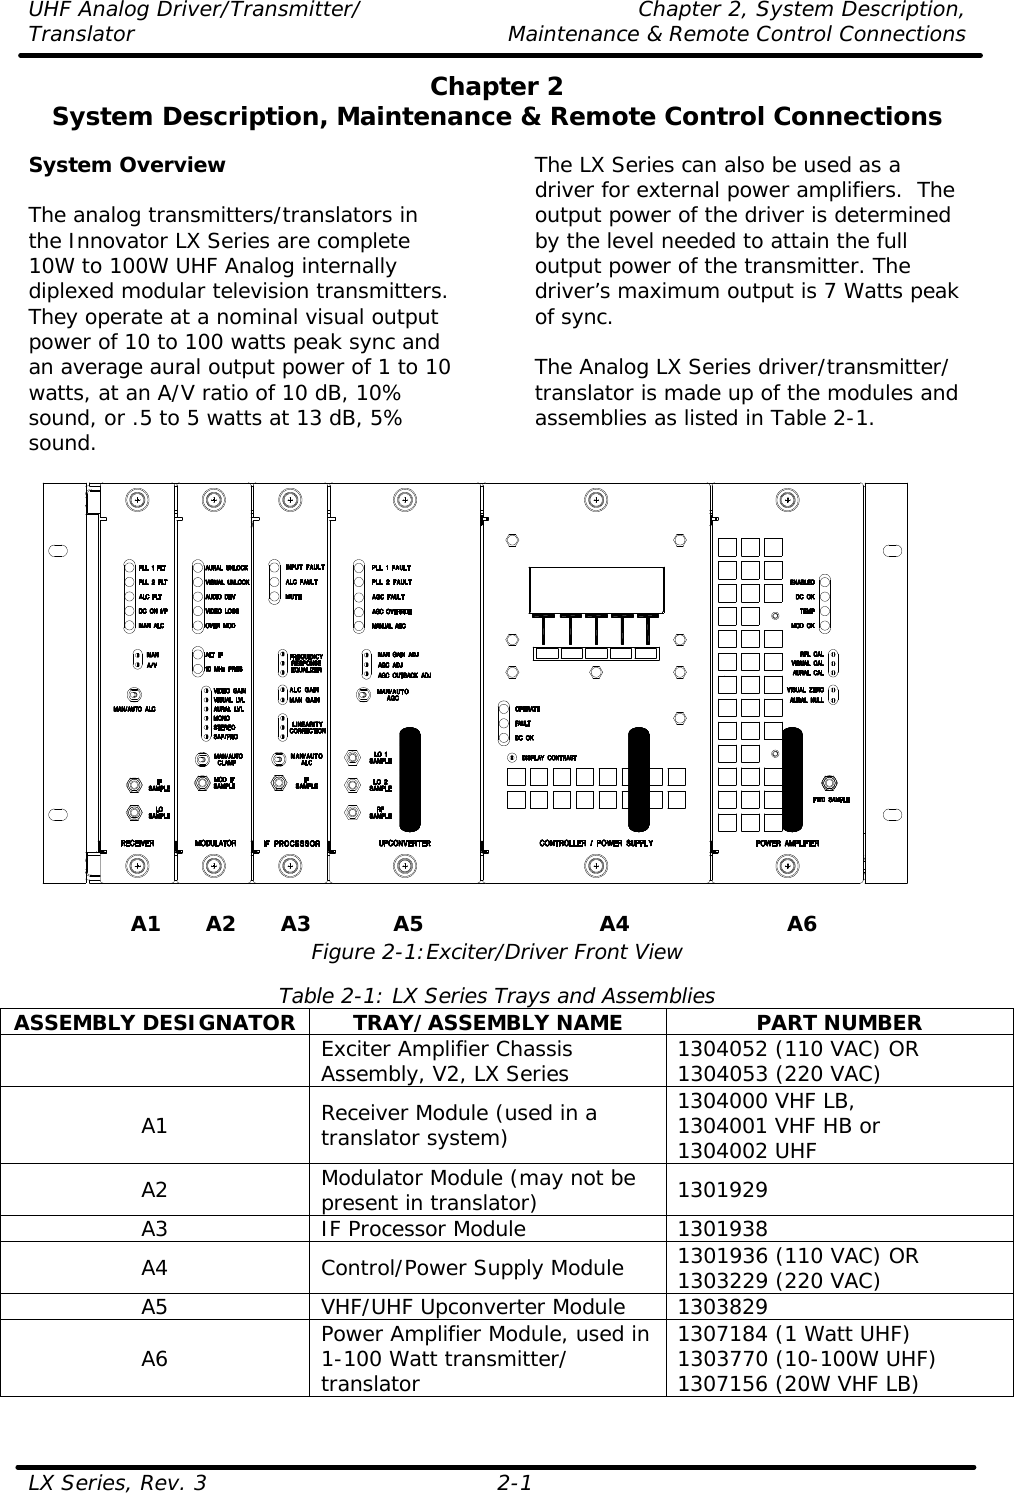 UHF Analog Driver/Transmitter/ Chapter 2, System Description, Translator Maintenance &amp; Remote Control Connections LX Series, Rev. 3 2-1 Chapter 2 System Description, Maintenance &amp; Remote Control Connections  System Overview  The analog transmitters/translators in the Innovator LX Series are complete 10W to 100W UHF Analog internally diplexed modular television transmitters.  They operate at a nominal visual output power of 10 to 100 watts peak sync and an average aural output power of 1 to 10 watts, at an A/V ratio of 10 dB, 10% sound, or .5 to 5 watts at 13 dB, 5% sound.  The LX Series can also be used as a driver for external power amplifiers.  The output power of the driver is determined by the level needed to attain the full output power of the transmitter. The driver’s maximum output is 7 Watts peak of sync.  The Analog LX Series driver/transmitter/ translator is made up of the modules and assemblies as listed in Table 2-1.     Figure 2-1:Exciter/Driver Front View  Table 2-1: LX Series Trays and Assemblies ASSEMBLY DESIGNATOR TRAY/ASSEMBLY NAME PART NUMBER  Exciter Amplifier Chassis Assembly, V2, LX Series 1304052 (110 VAC) OR 1304053 (220 VAC) A1 Receiver Module (used in a translator system) 1304000 VHF LB, 1304001 VHF HB or 1304002 UHF A2 Modulator Module (may not be present in translator) 1301929 A3 IF Processor Module 1301938 A4 Control/Power Supply Module 1301936 (110 VAC) OR 1303229 (220 VAC) A5 VHF/UHF Upconverter Module 1303829 A6 Power Amplifier Module, used in 1-100 Watt transmitter/ translator 1307184 (1 Watt UHF) 1303770 (10-100W UHF) 1307156 (20W VHF LB) A2 A3 A5 A4 A6 A1 